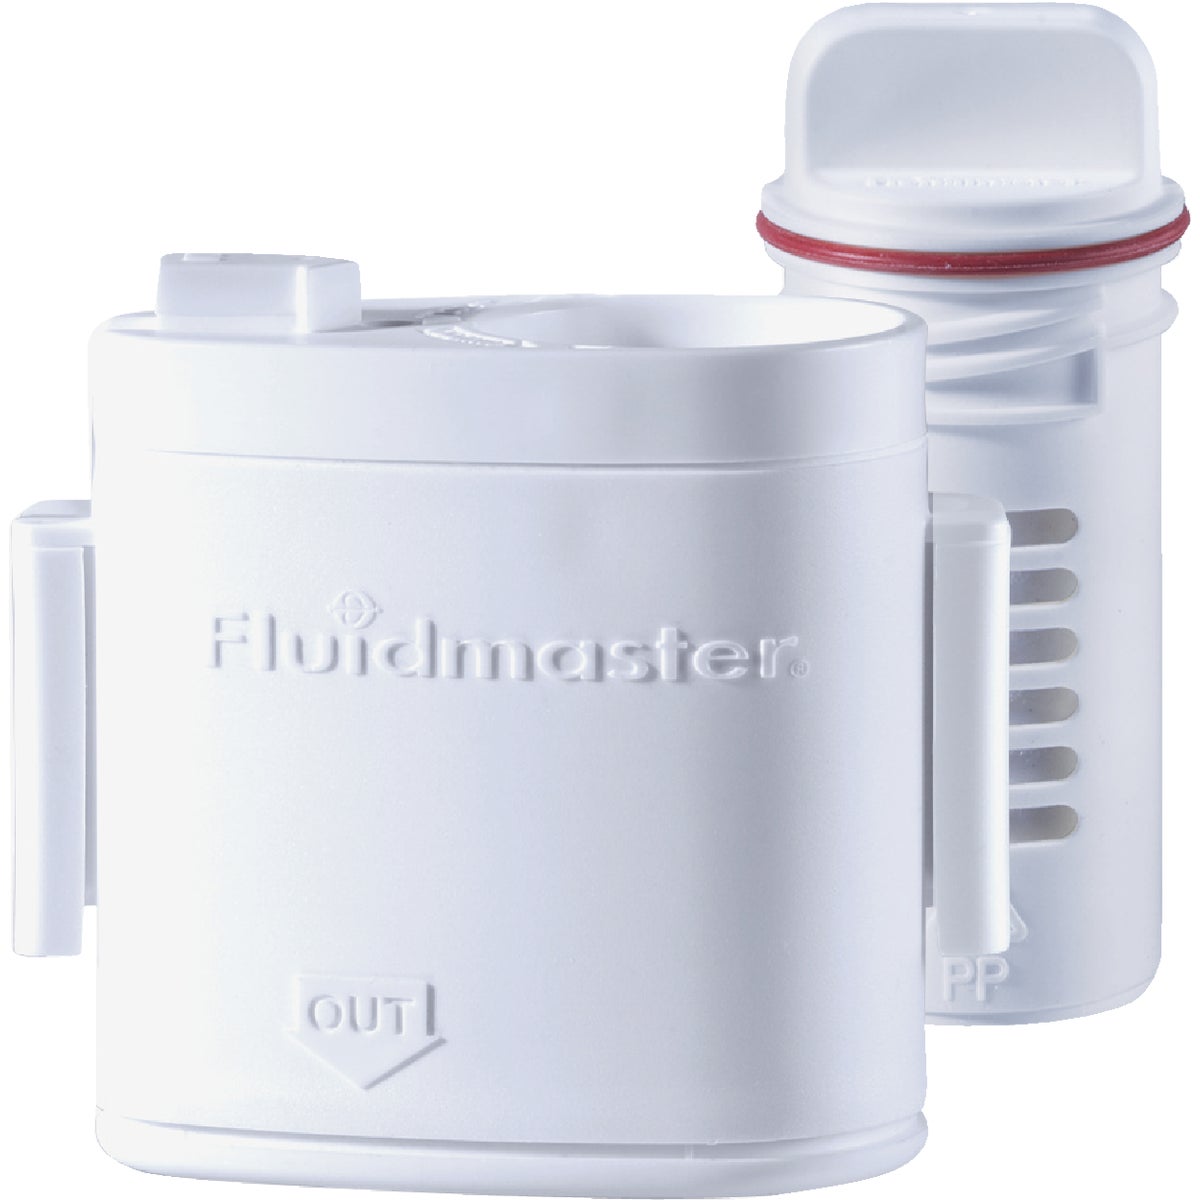 Fluidmaster Flush 'n Sparkle Automatic Toilet Bowl Cleaning System with Bleach